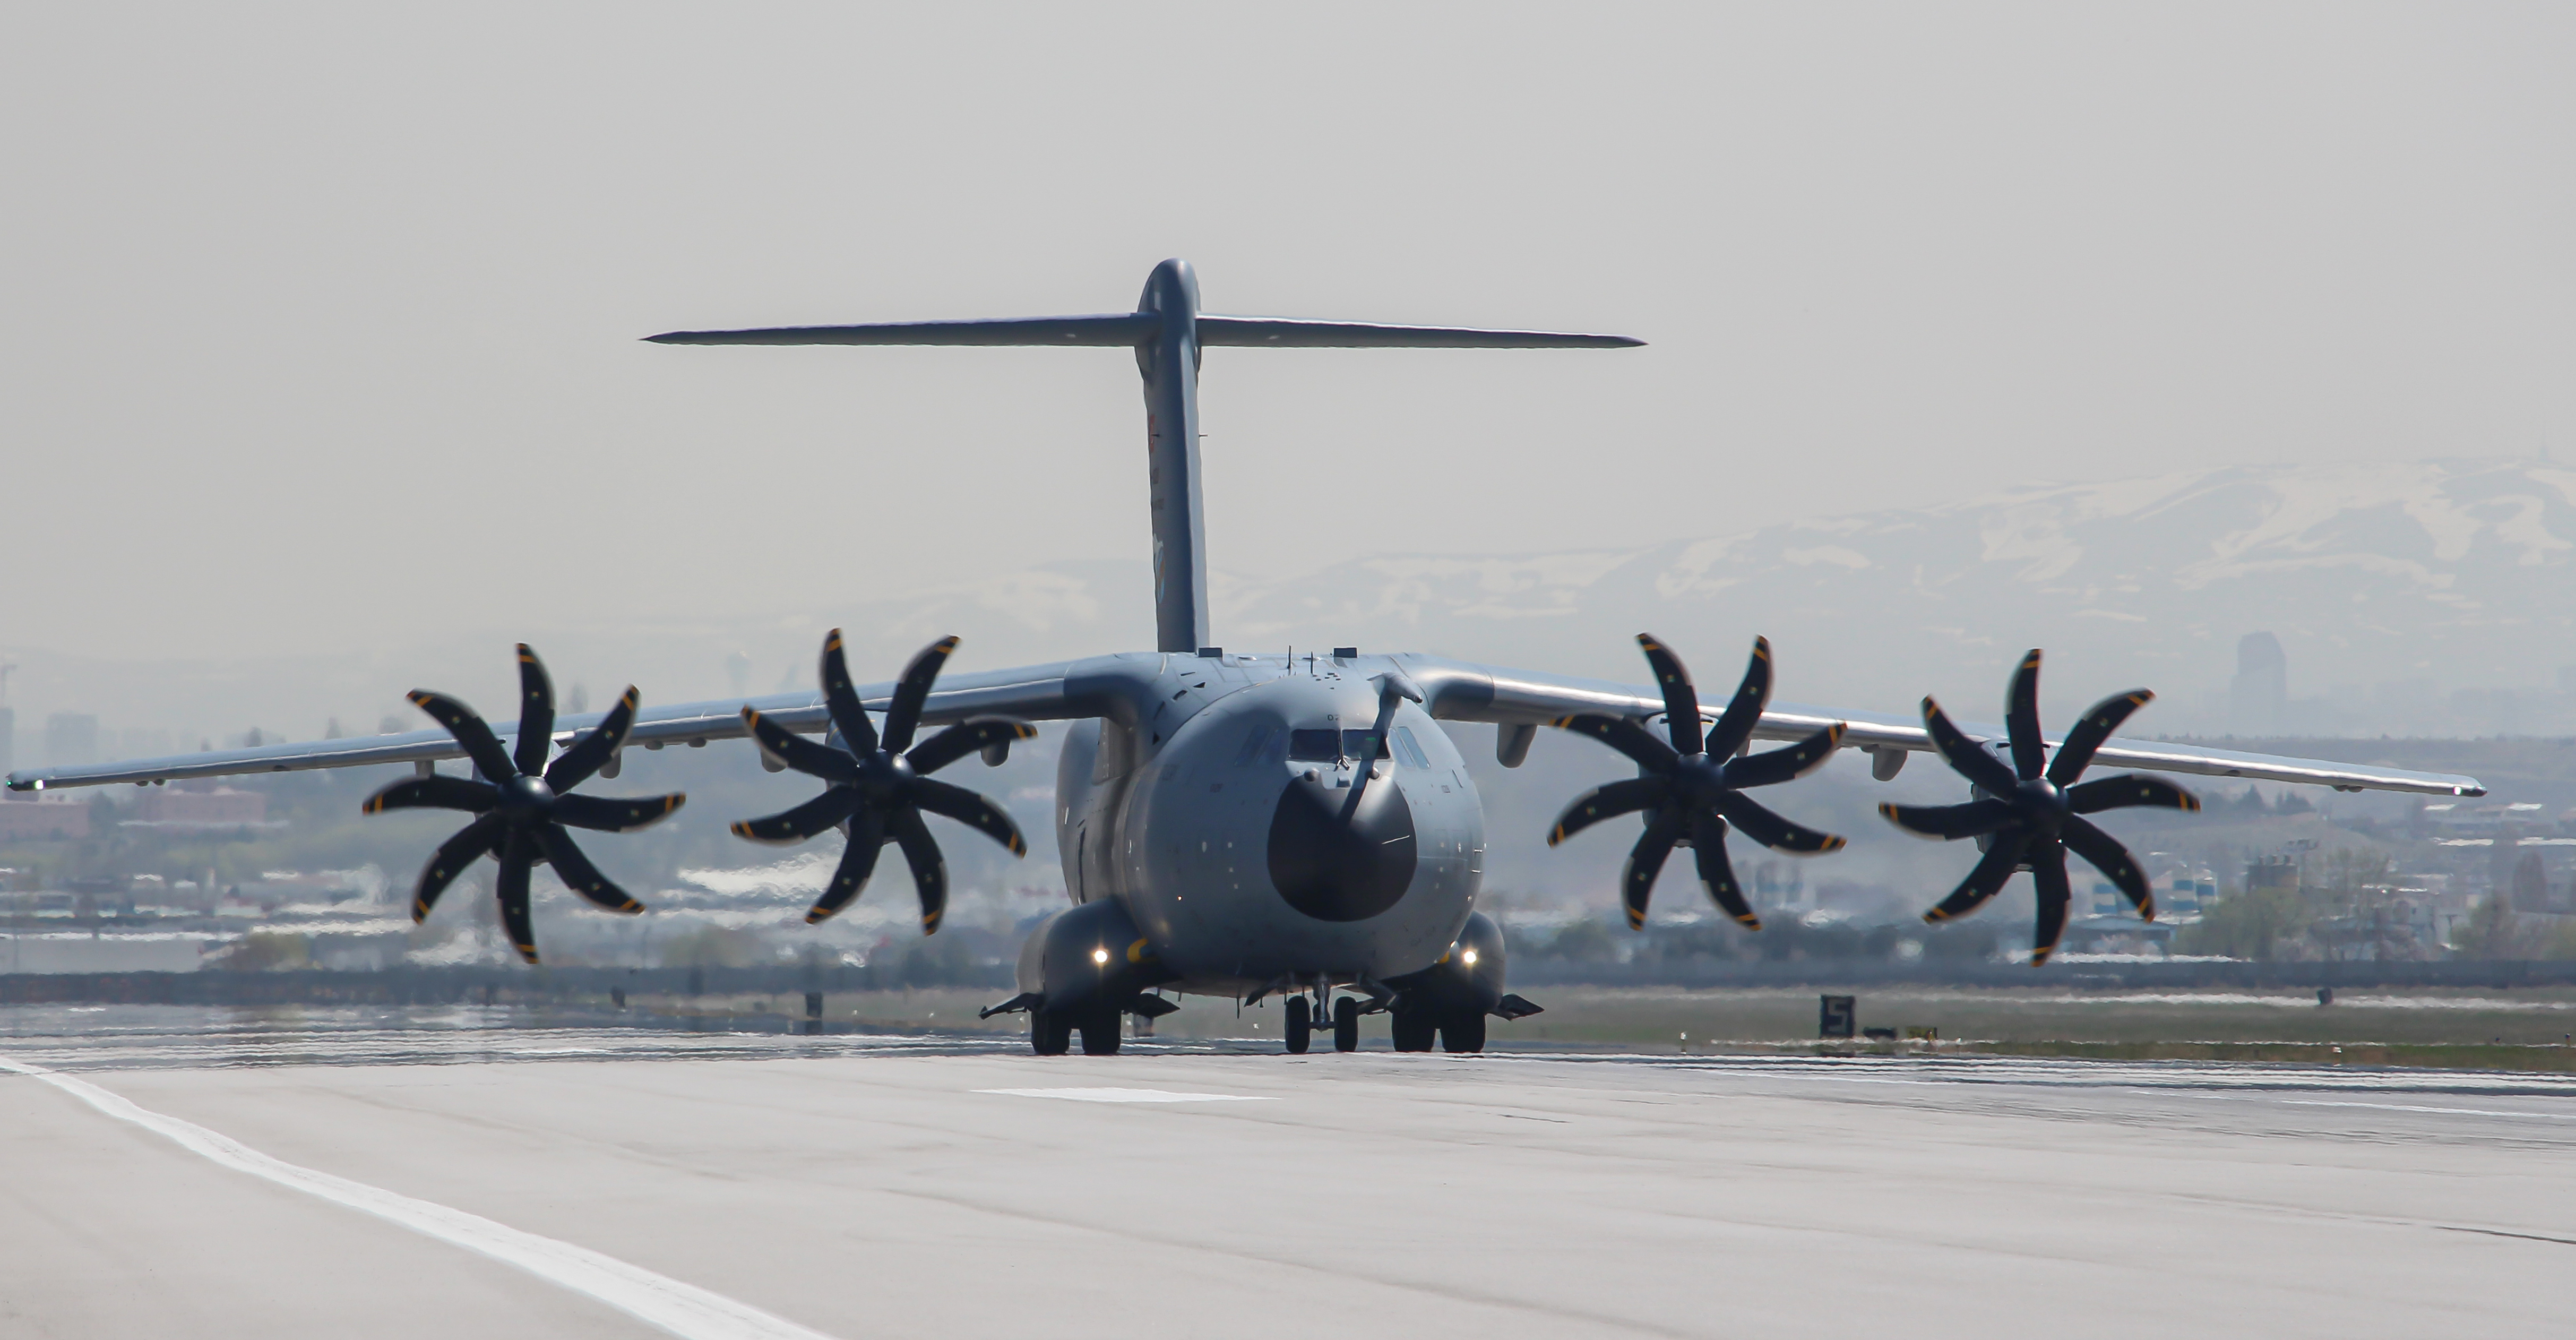 Retrofit on TurAF’s First A400M Atlas Strategic Transport Aircraft at the 2nd AMFD to be Completed in July 2021